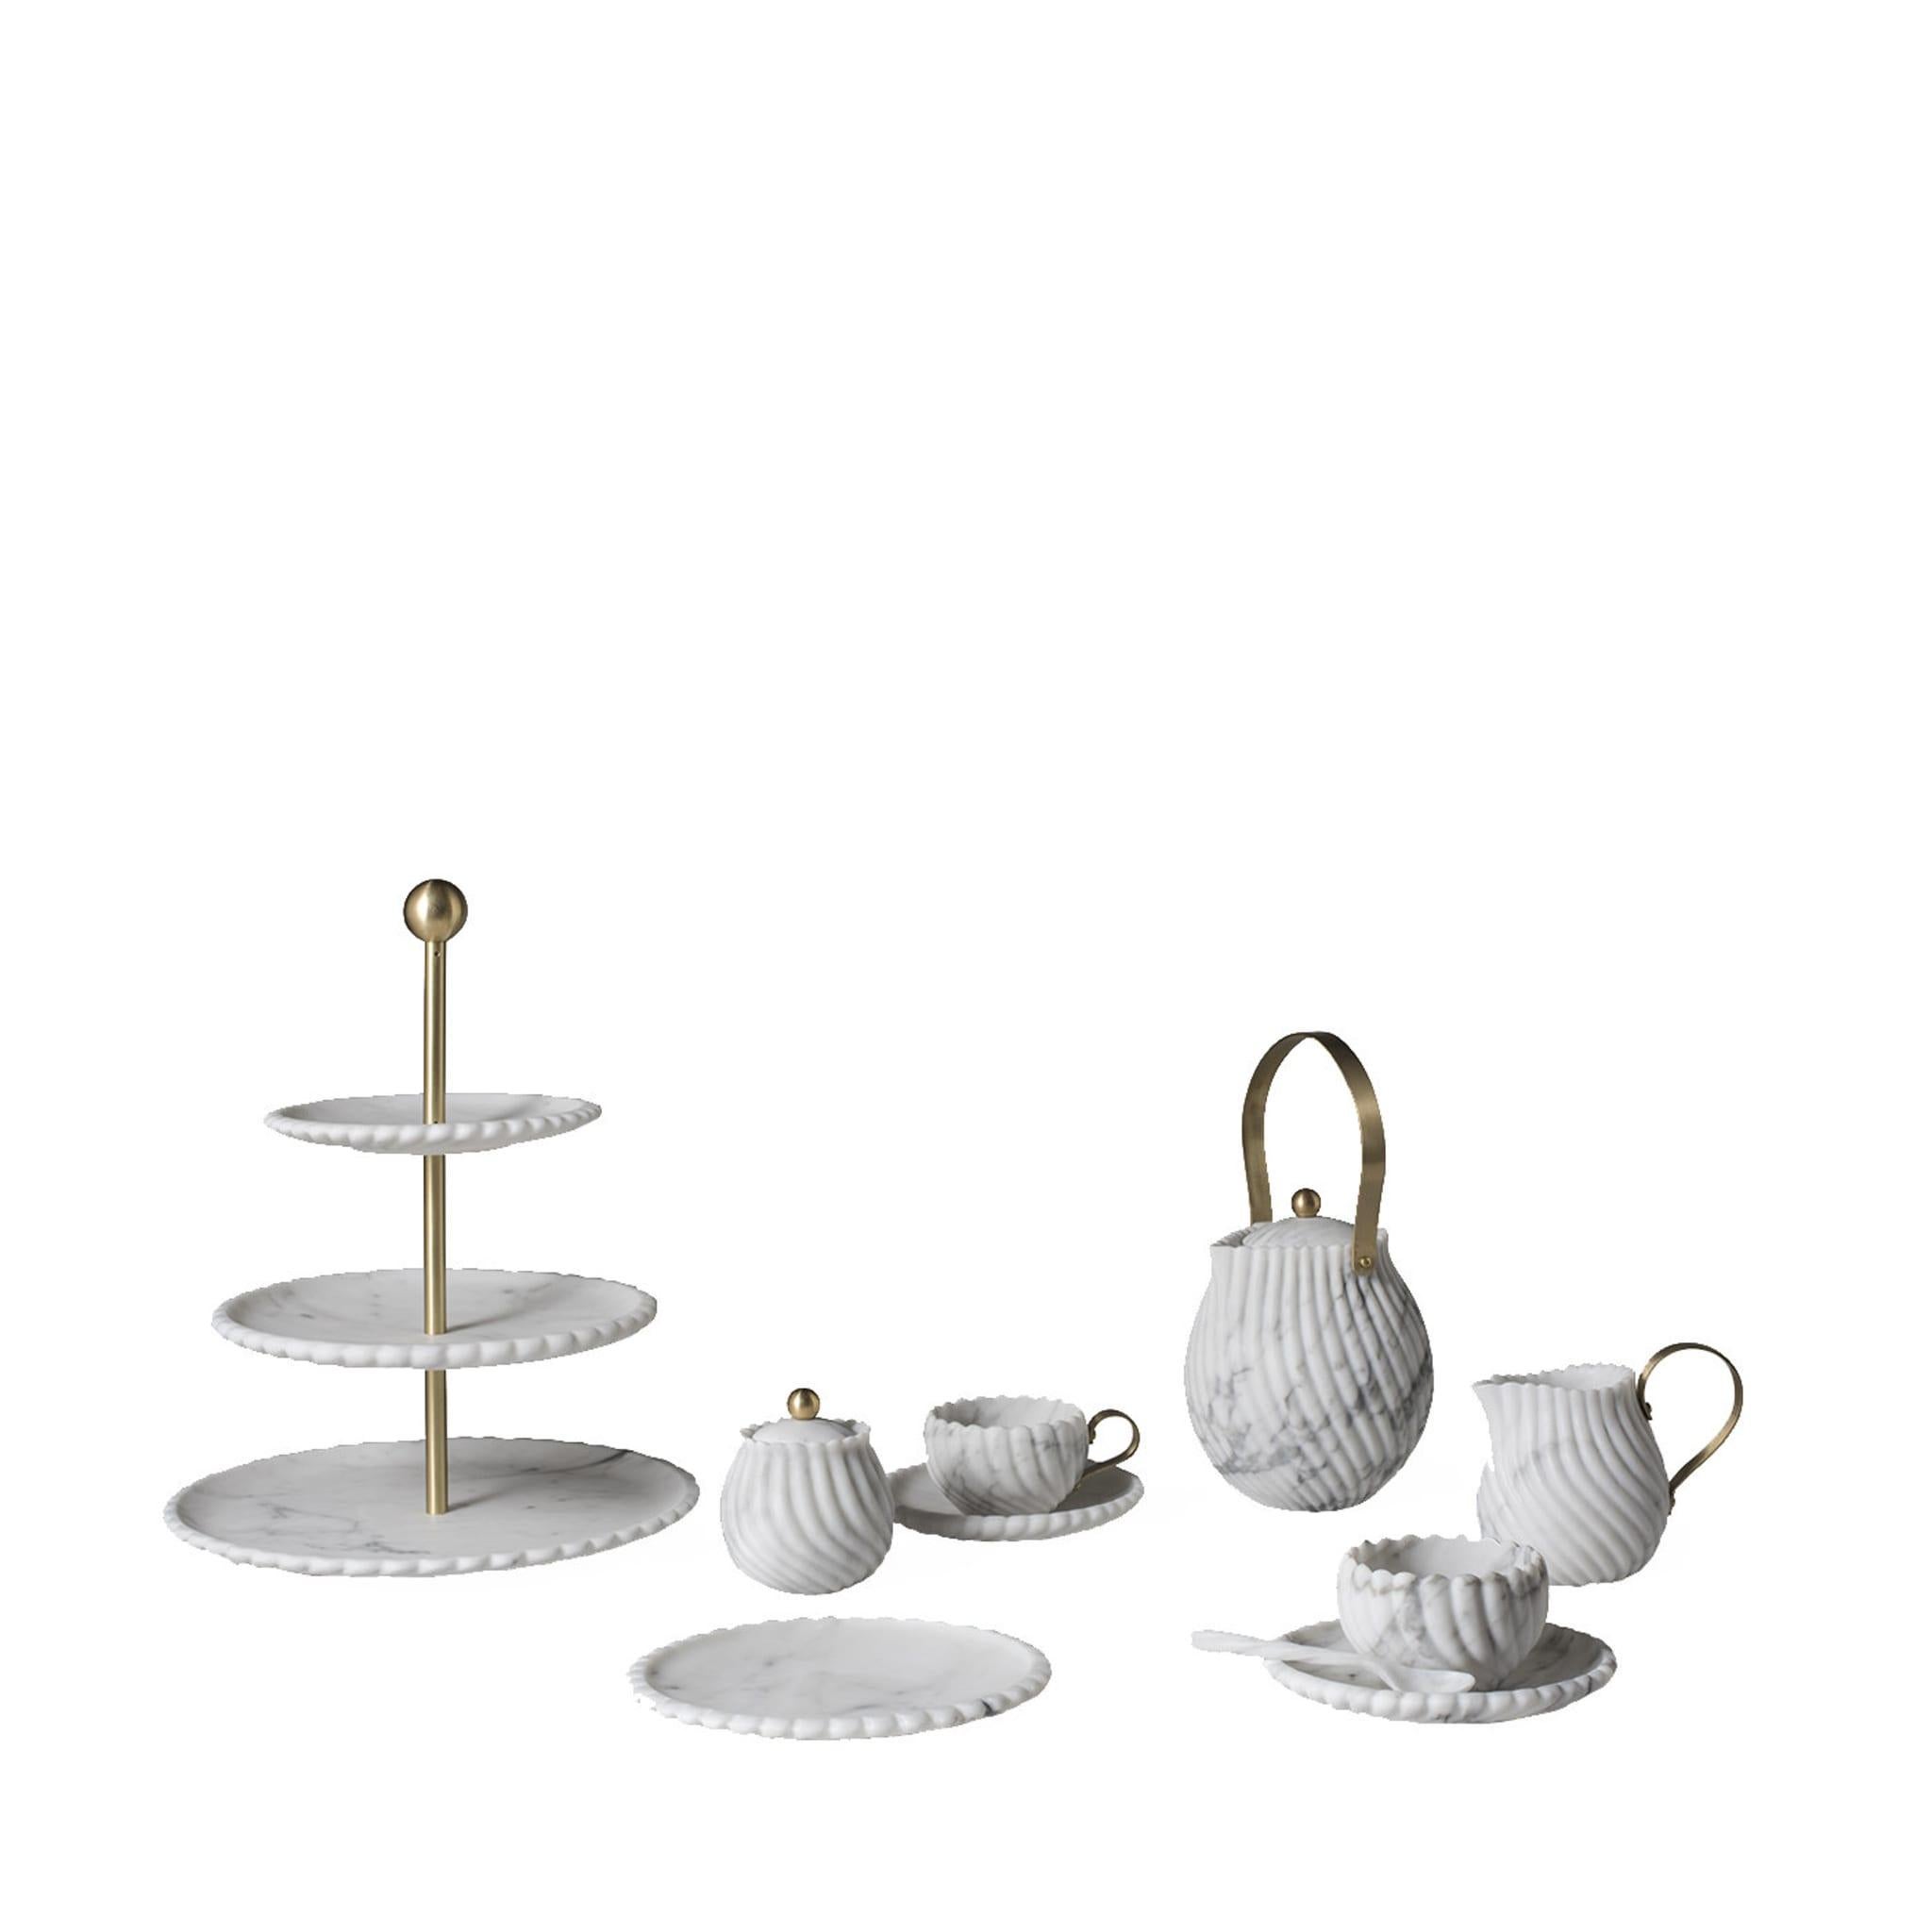 This classic item belonging to the British afternoon tea tradition is reinterpreted in an Italian way, thanks to the use of noble materials and a modern design. The curves of the jug are in Arabescato marble and their surface features striking